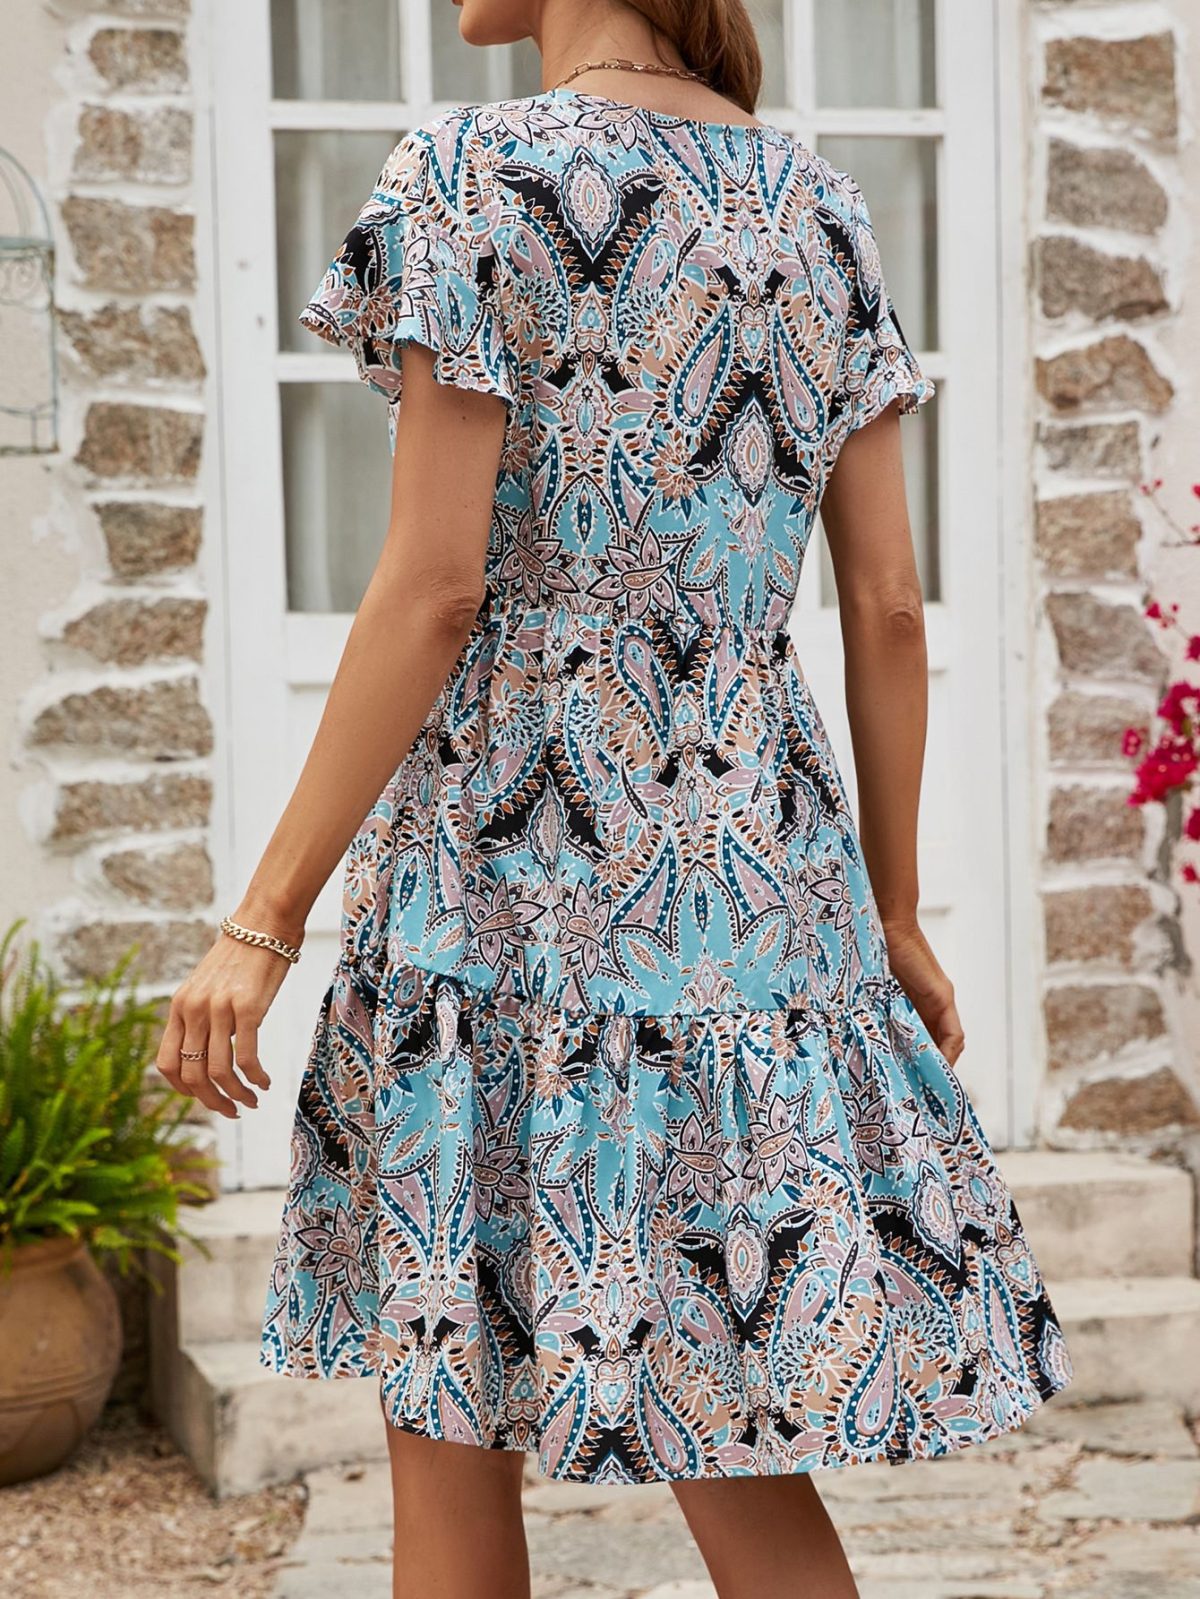 V Neck Ruffle Loose Casual Holiday Floral Print Dress in Dresses